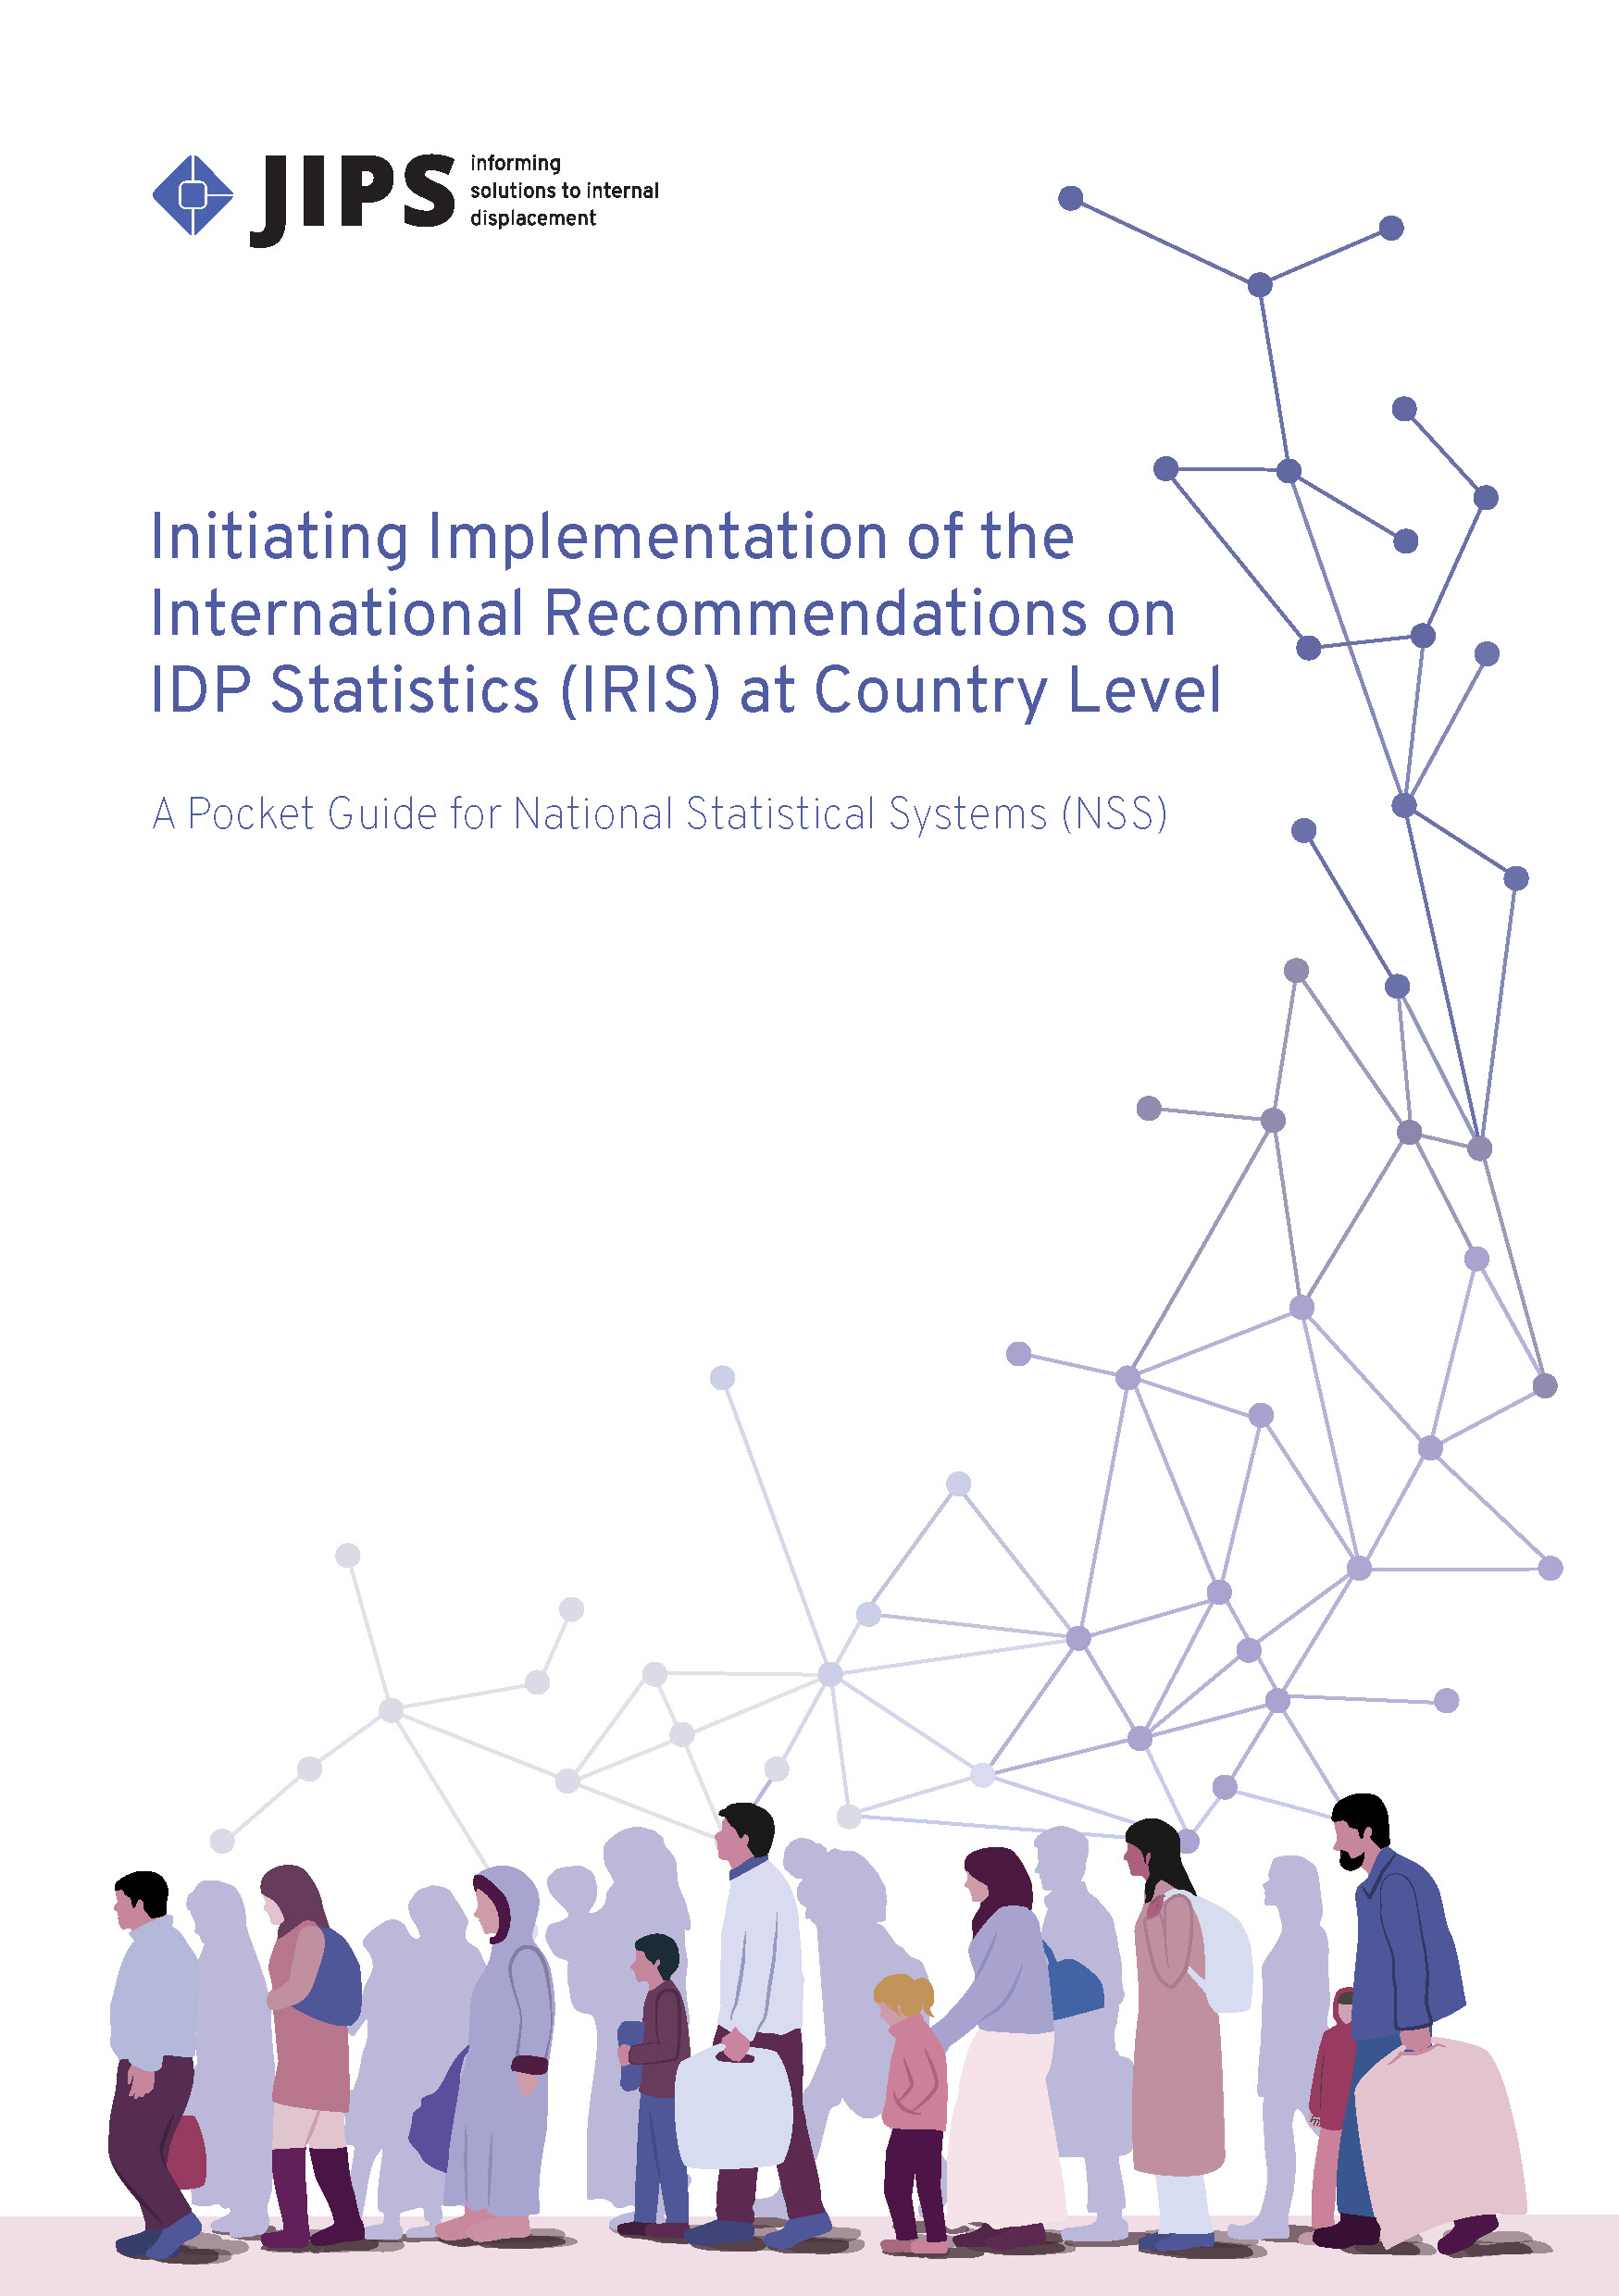 JIPS – Initiating Implementation of the International Recommendations on IDP Statistics (IRIS) at Country Level: A Pocket Guide for National Statistical Systems